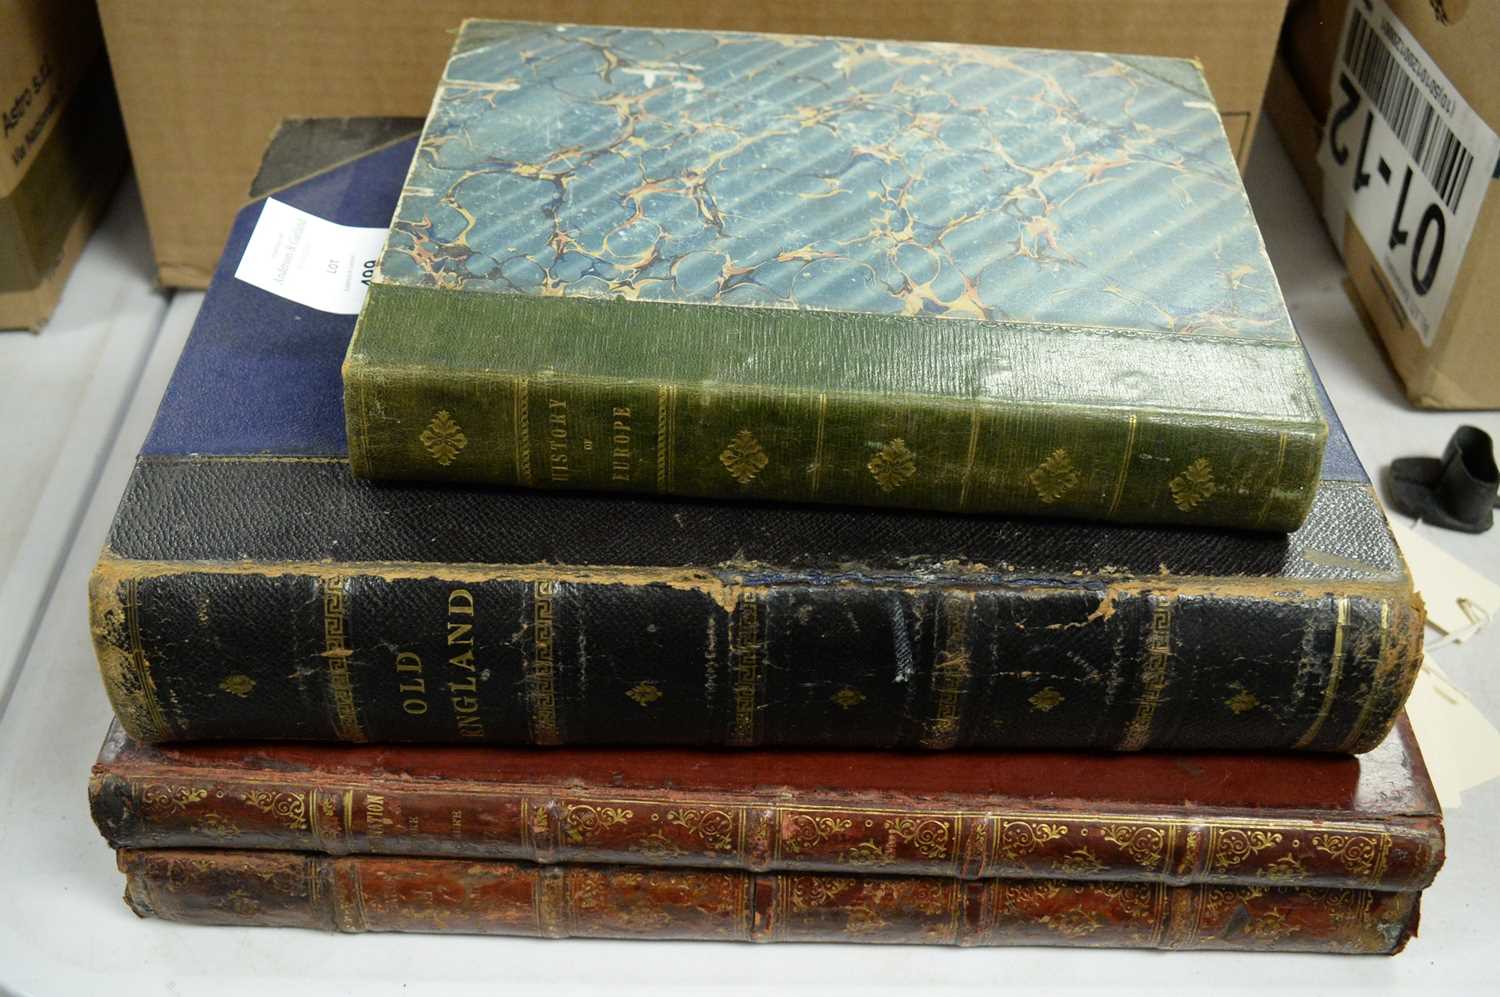 A selection of books including Old England, by Charles Knight.